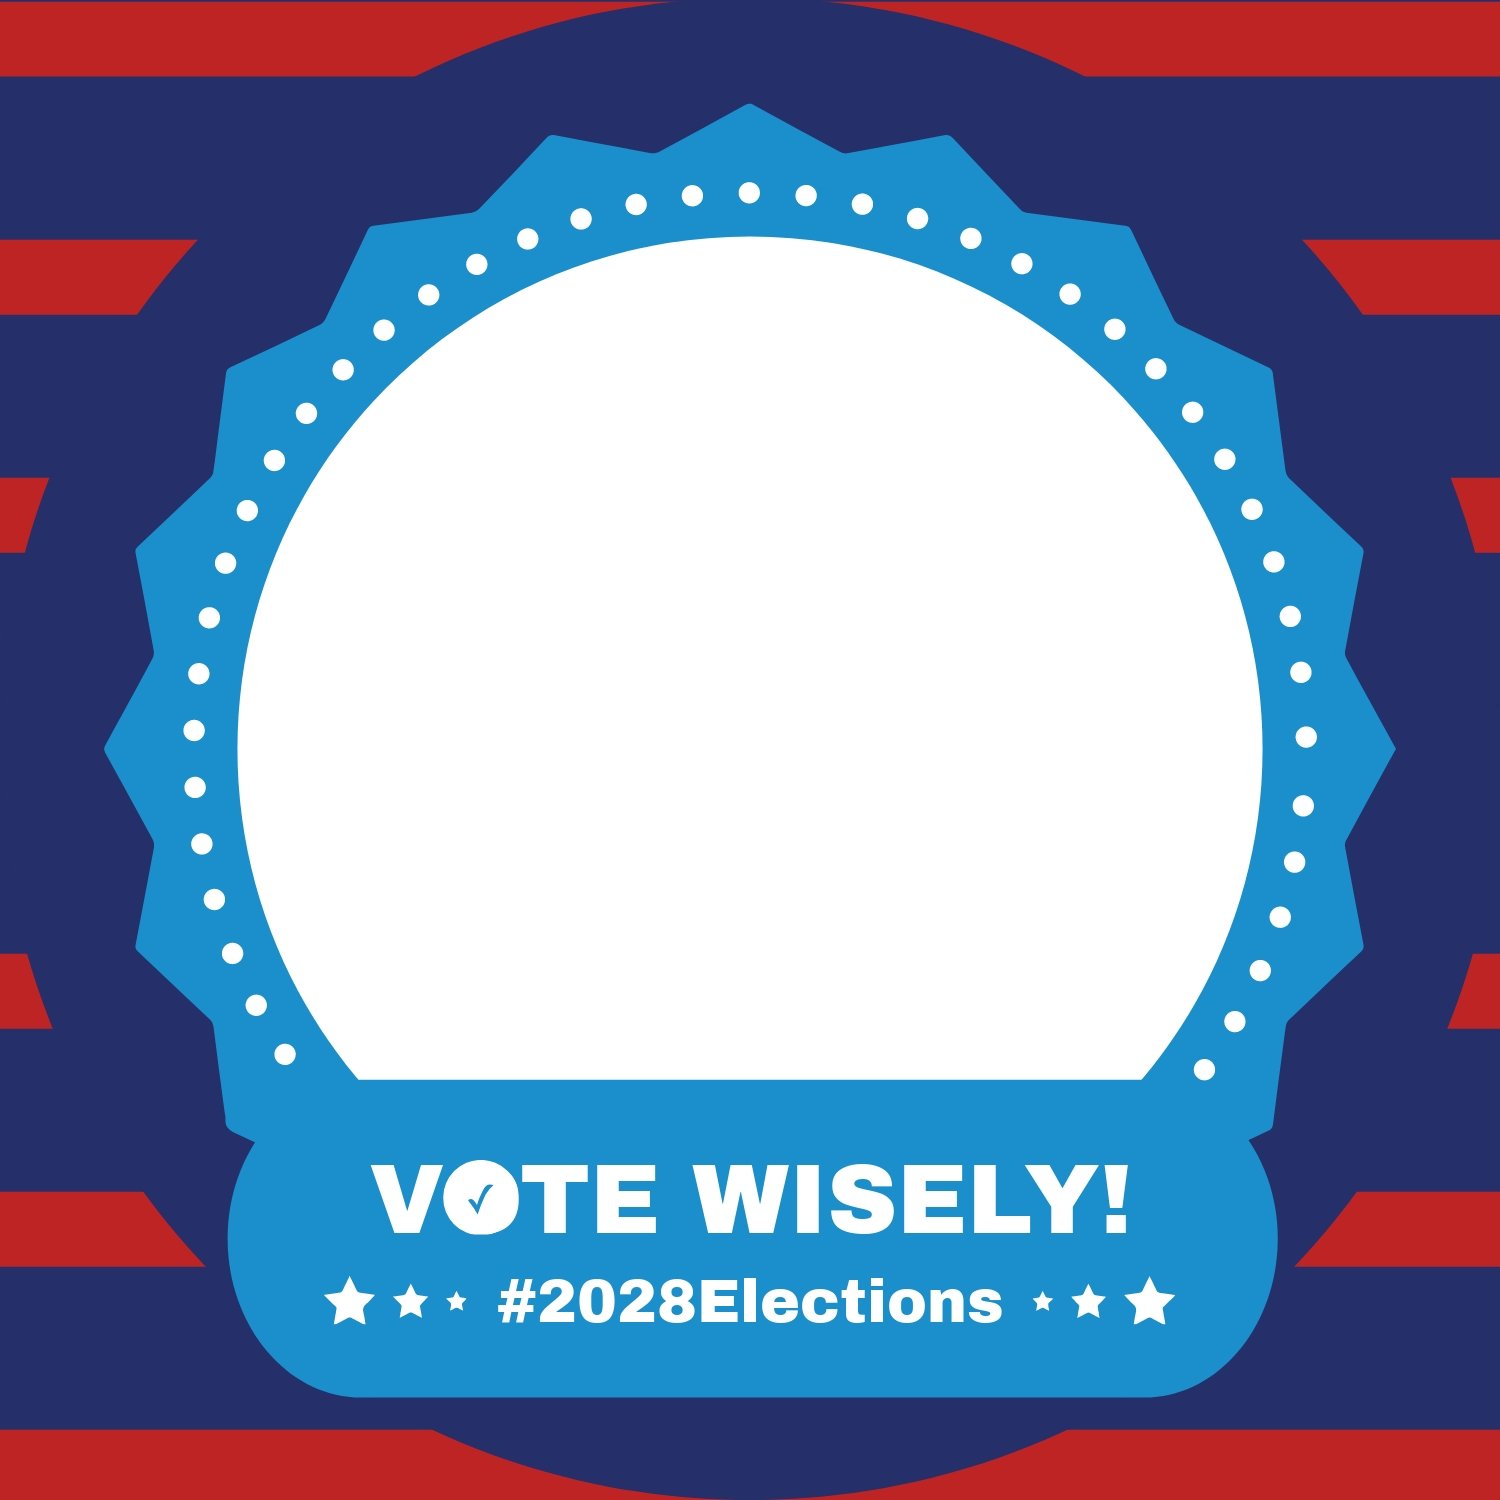 Free Election Facebook Profile Frame Template